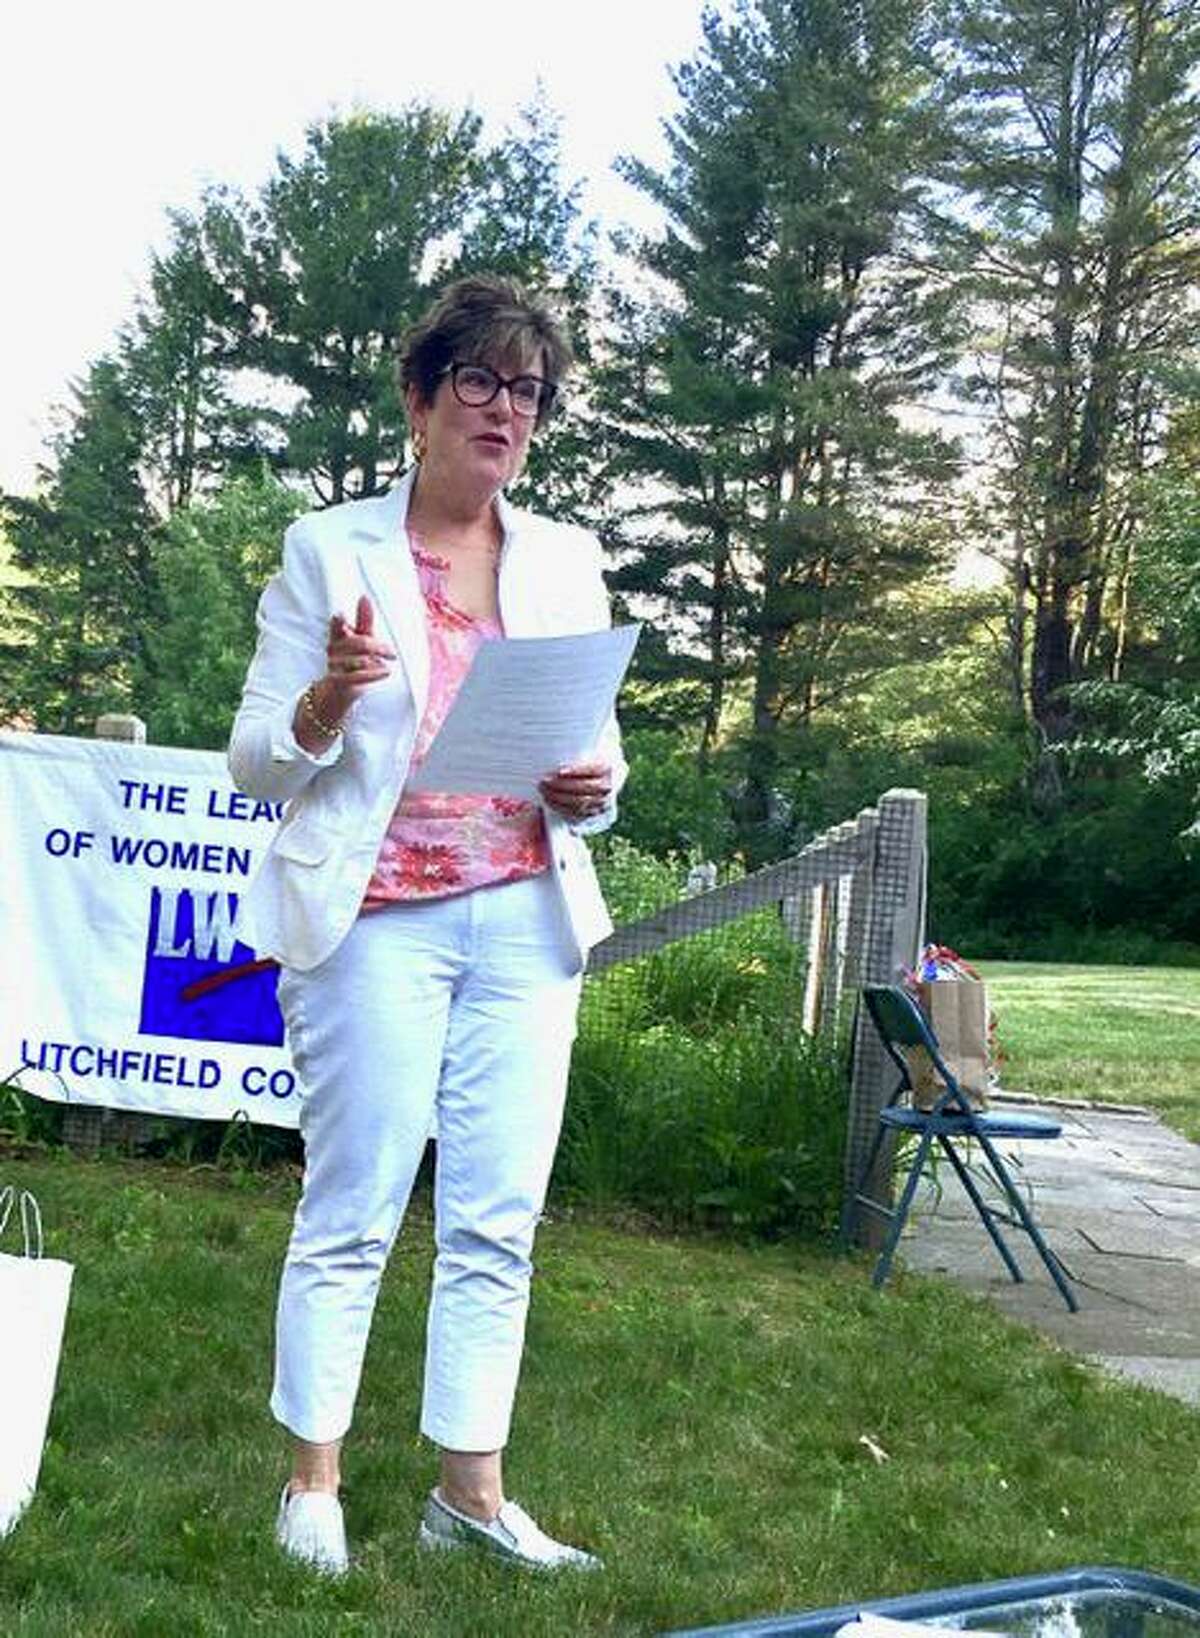 The League of Women Voters of Litchfield County recently announces the newly elected Board of Directors for 2022-23. Pictured is newly elected president, Marianne Seeber.